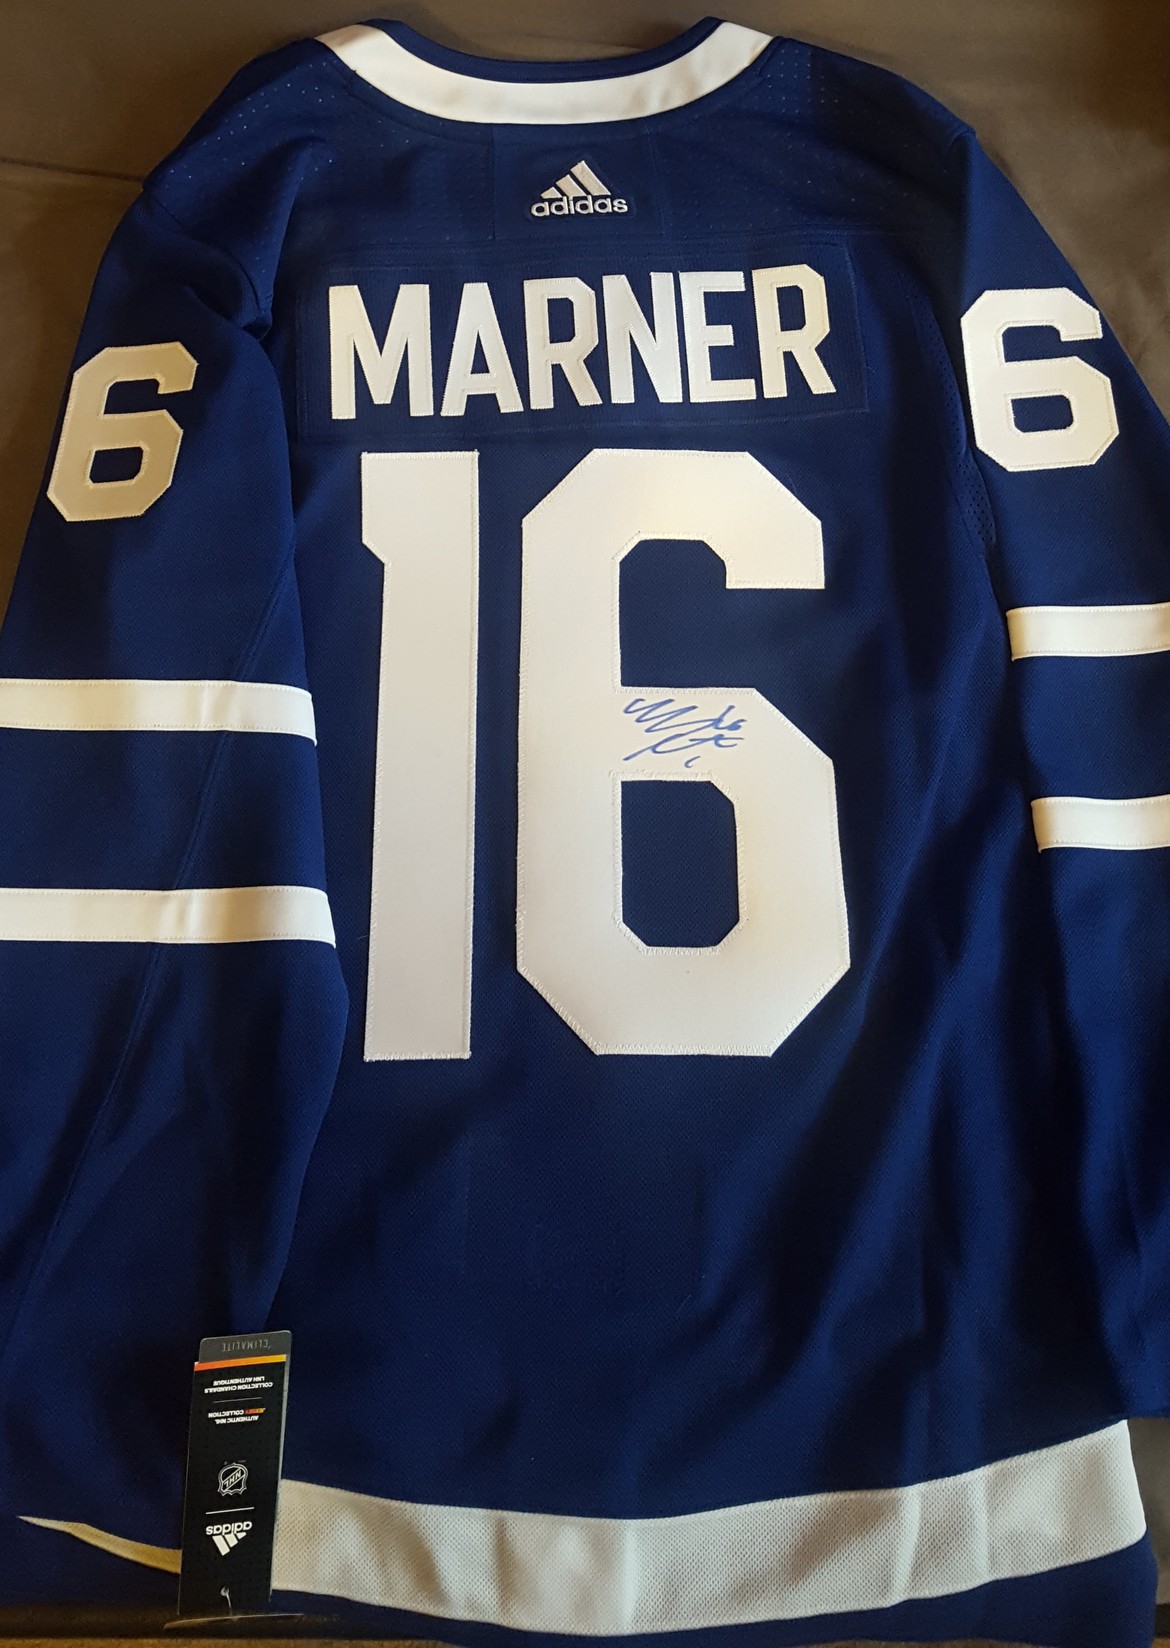 Signed Mitch Marner Jersey